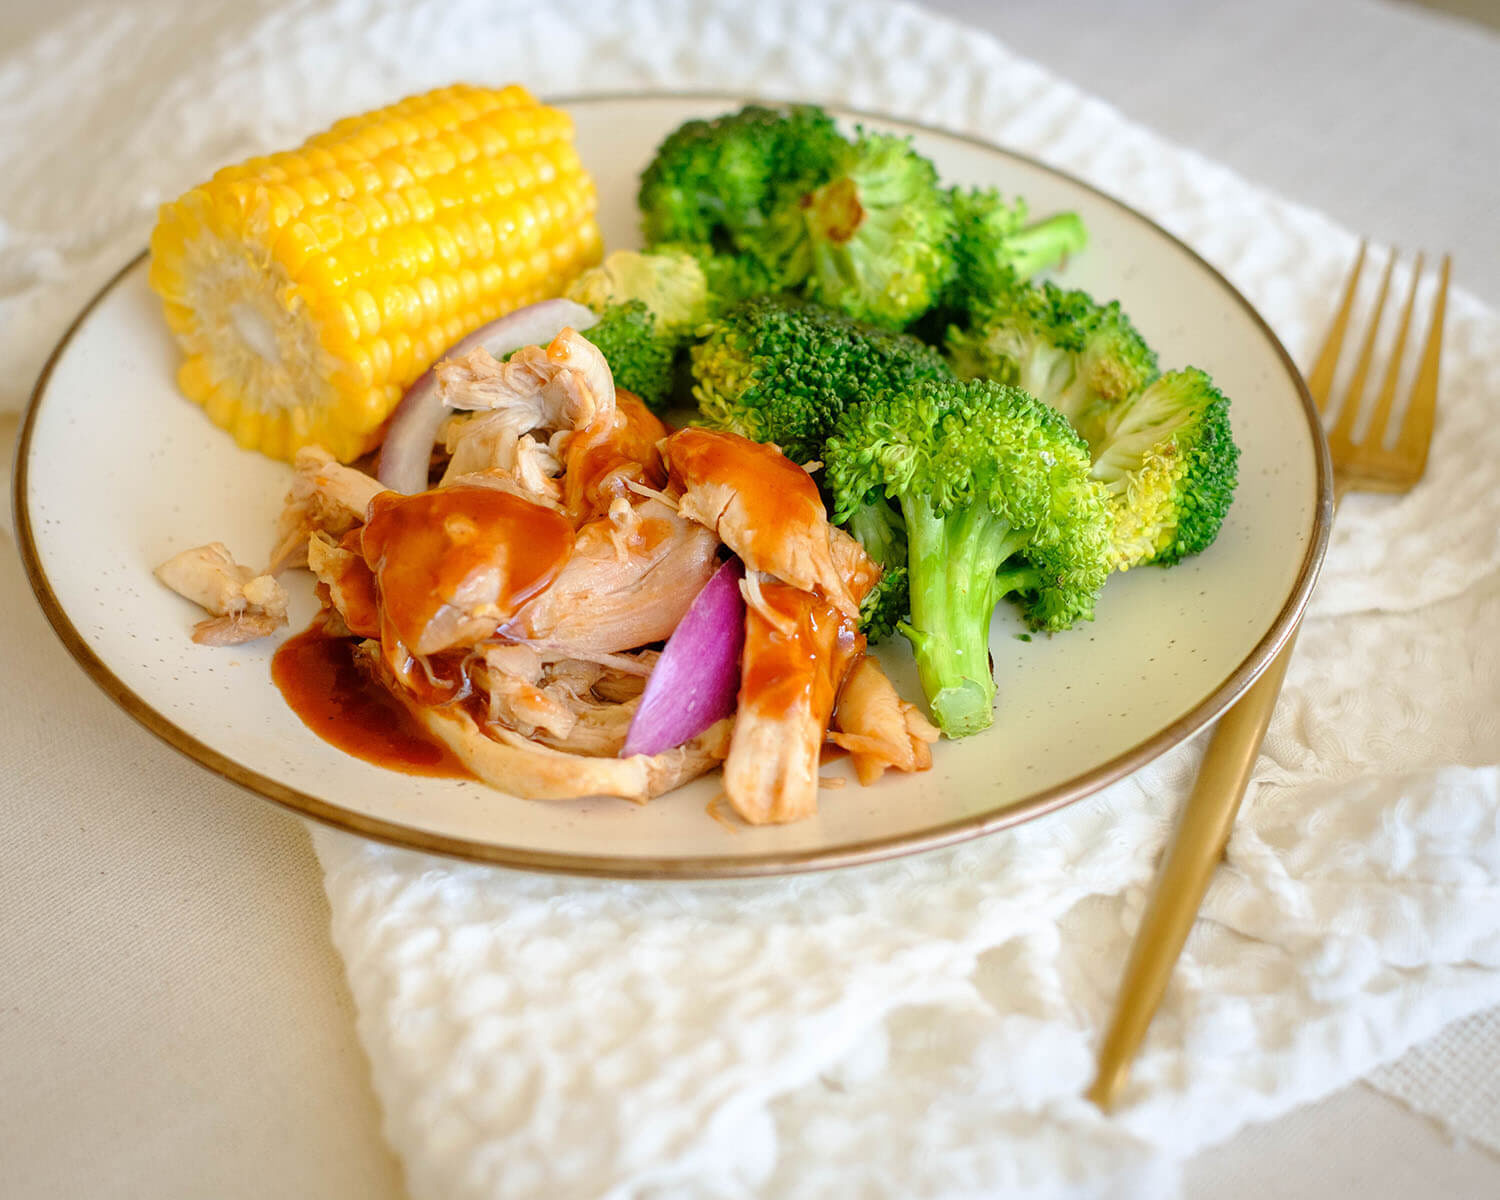 Round plate with shredded bbq chicken, corn, and broccoli